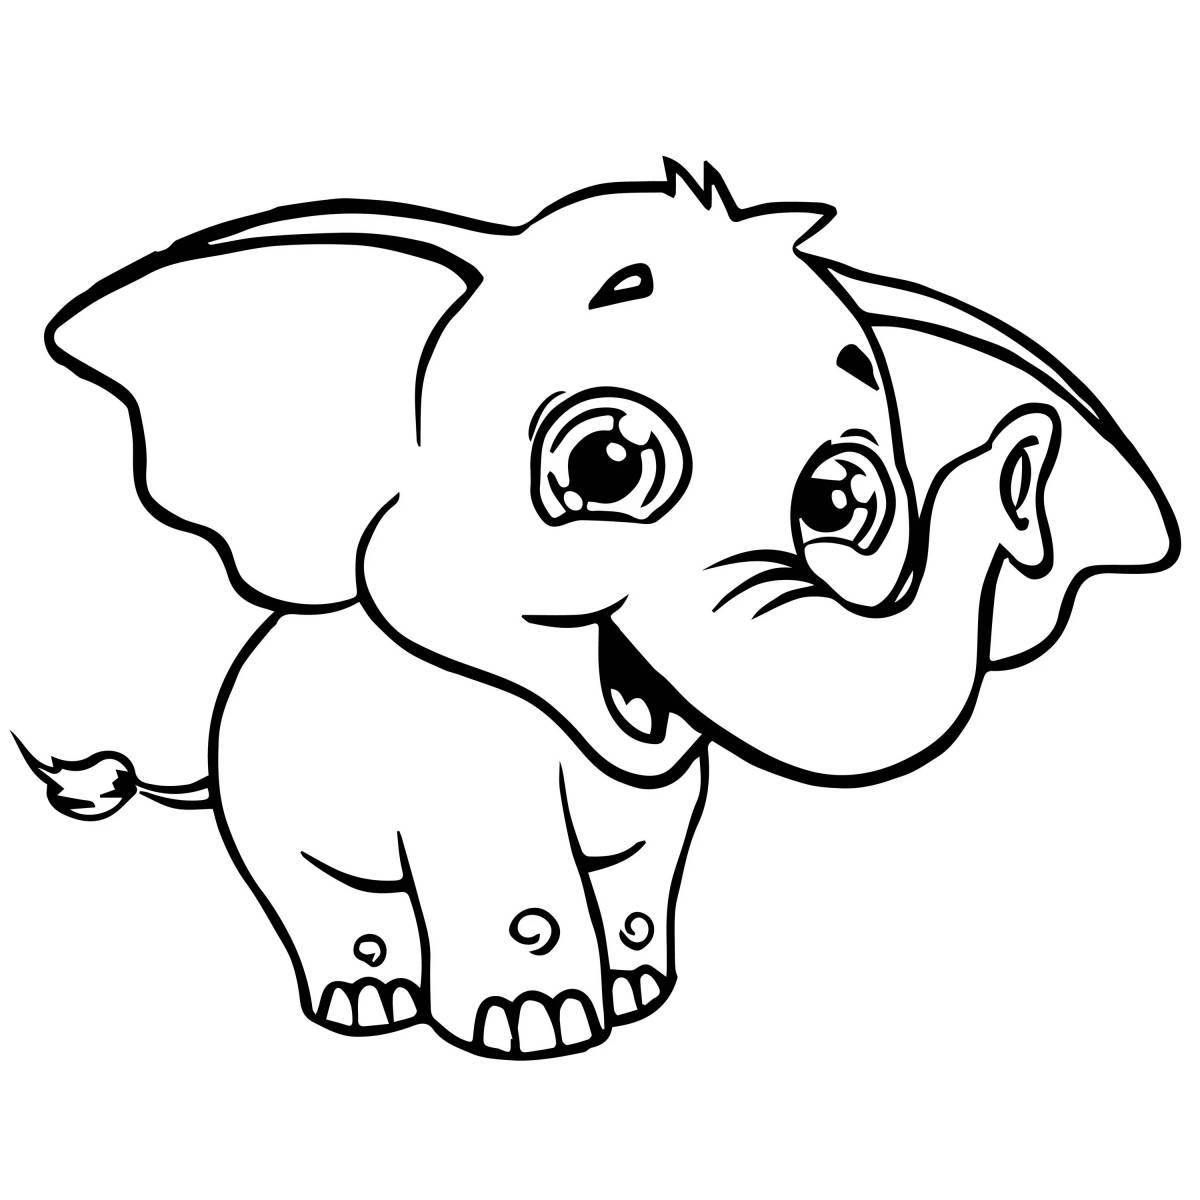 Living elephant coloring page